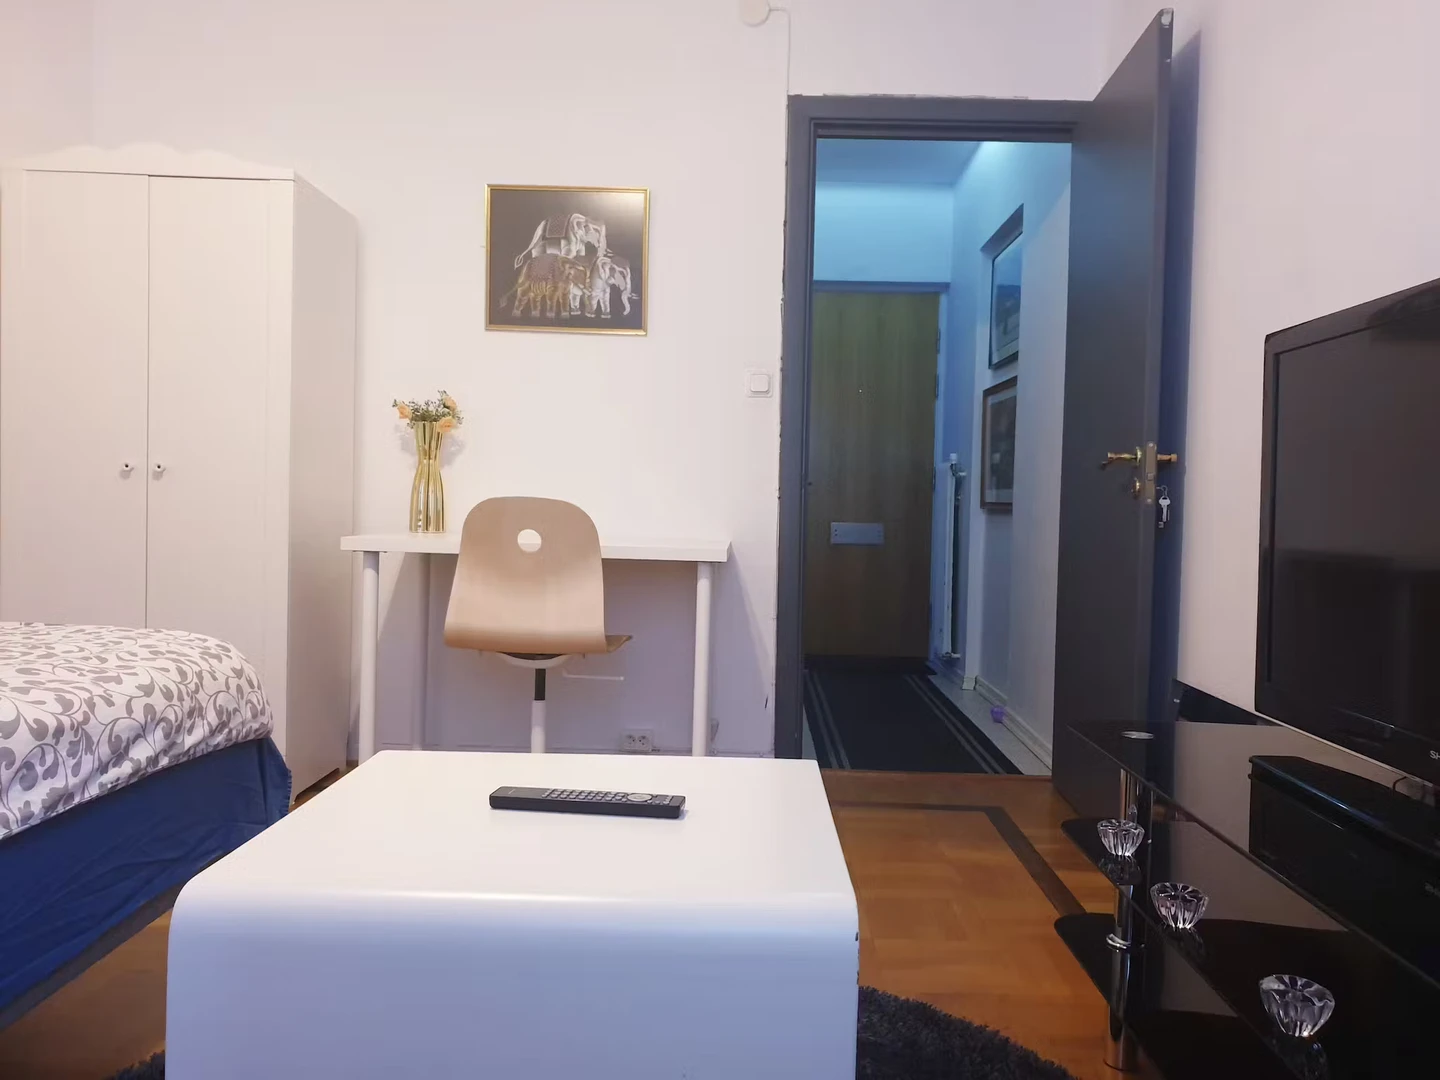 Renting rooms by the month in Malmo